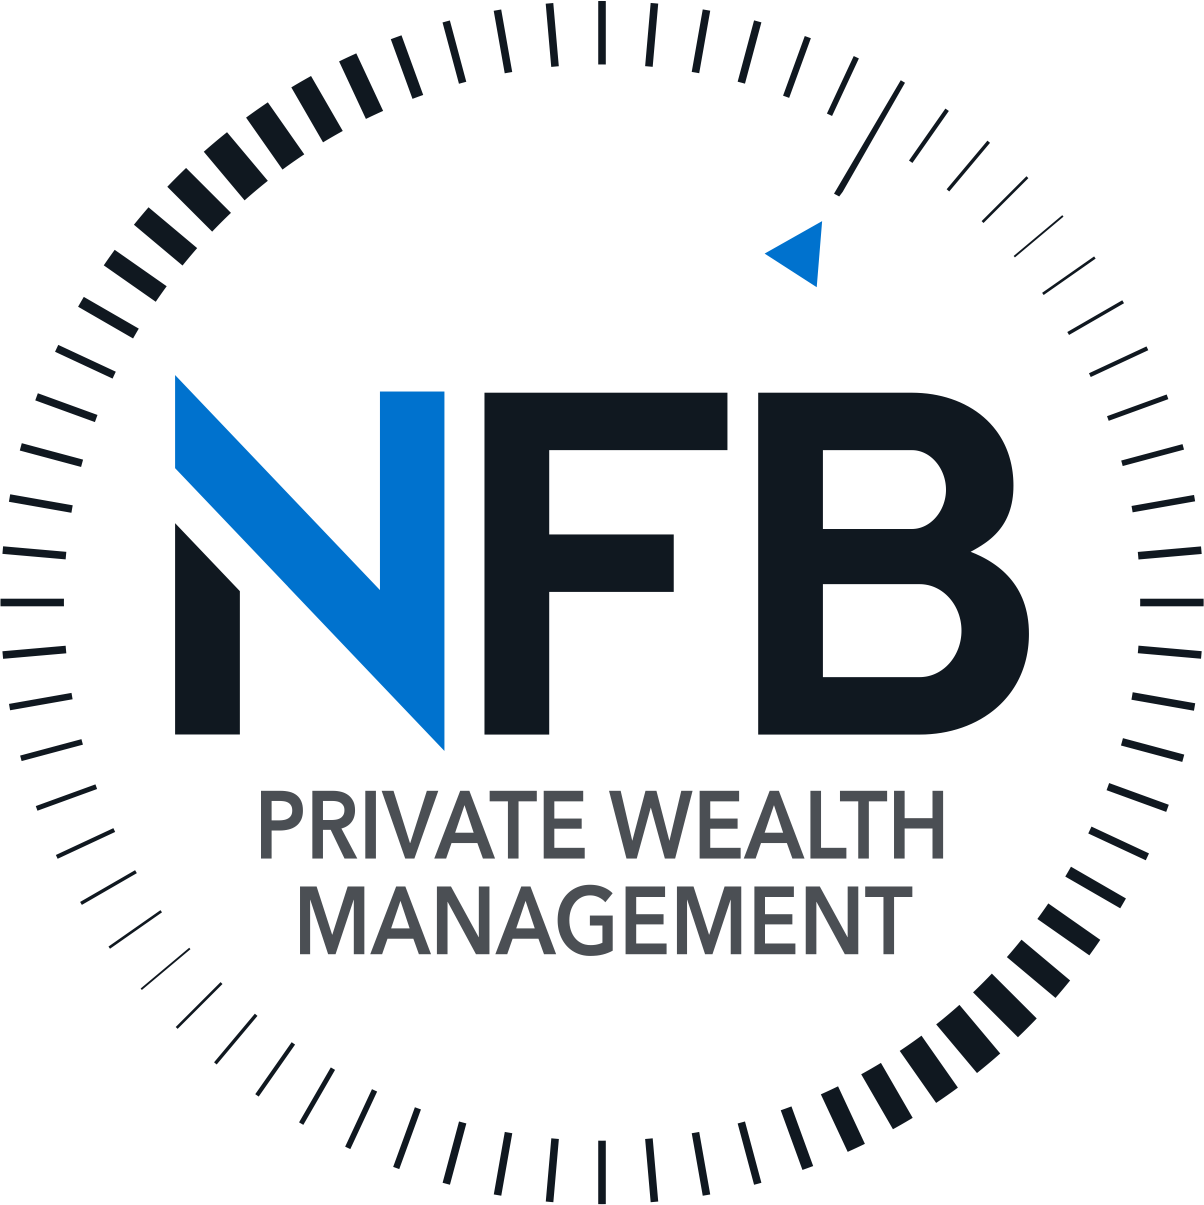 Co-authored by Brendon Wright and Stephen Katzenellenbogen CFP®